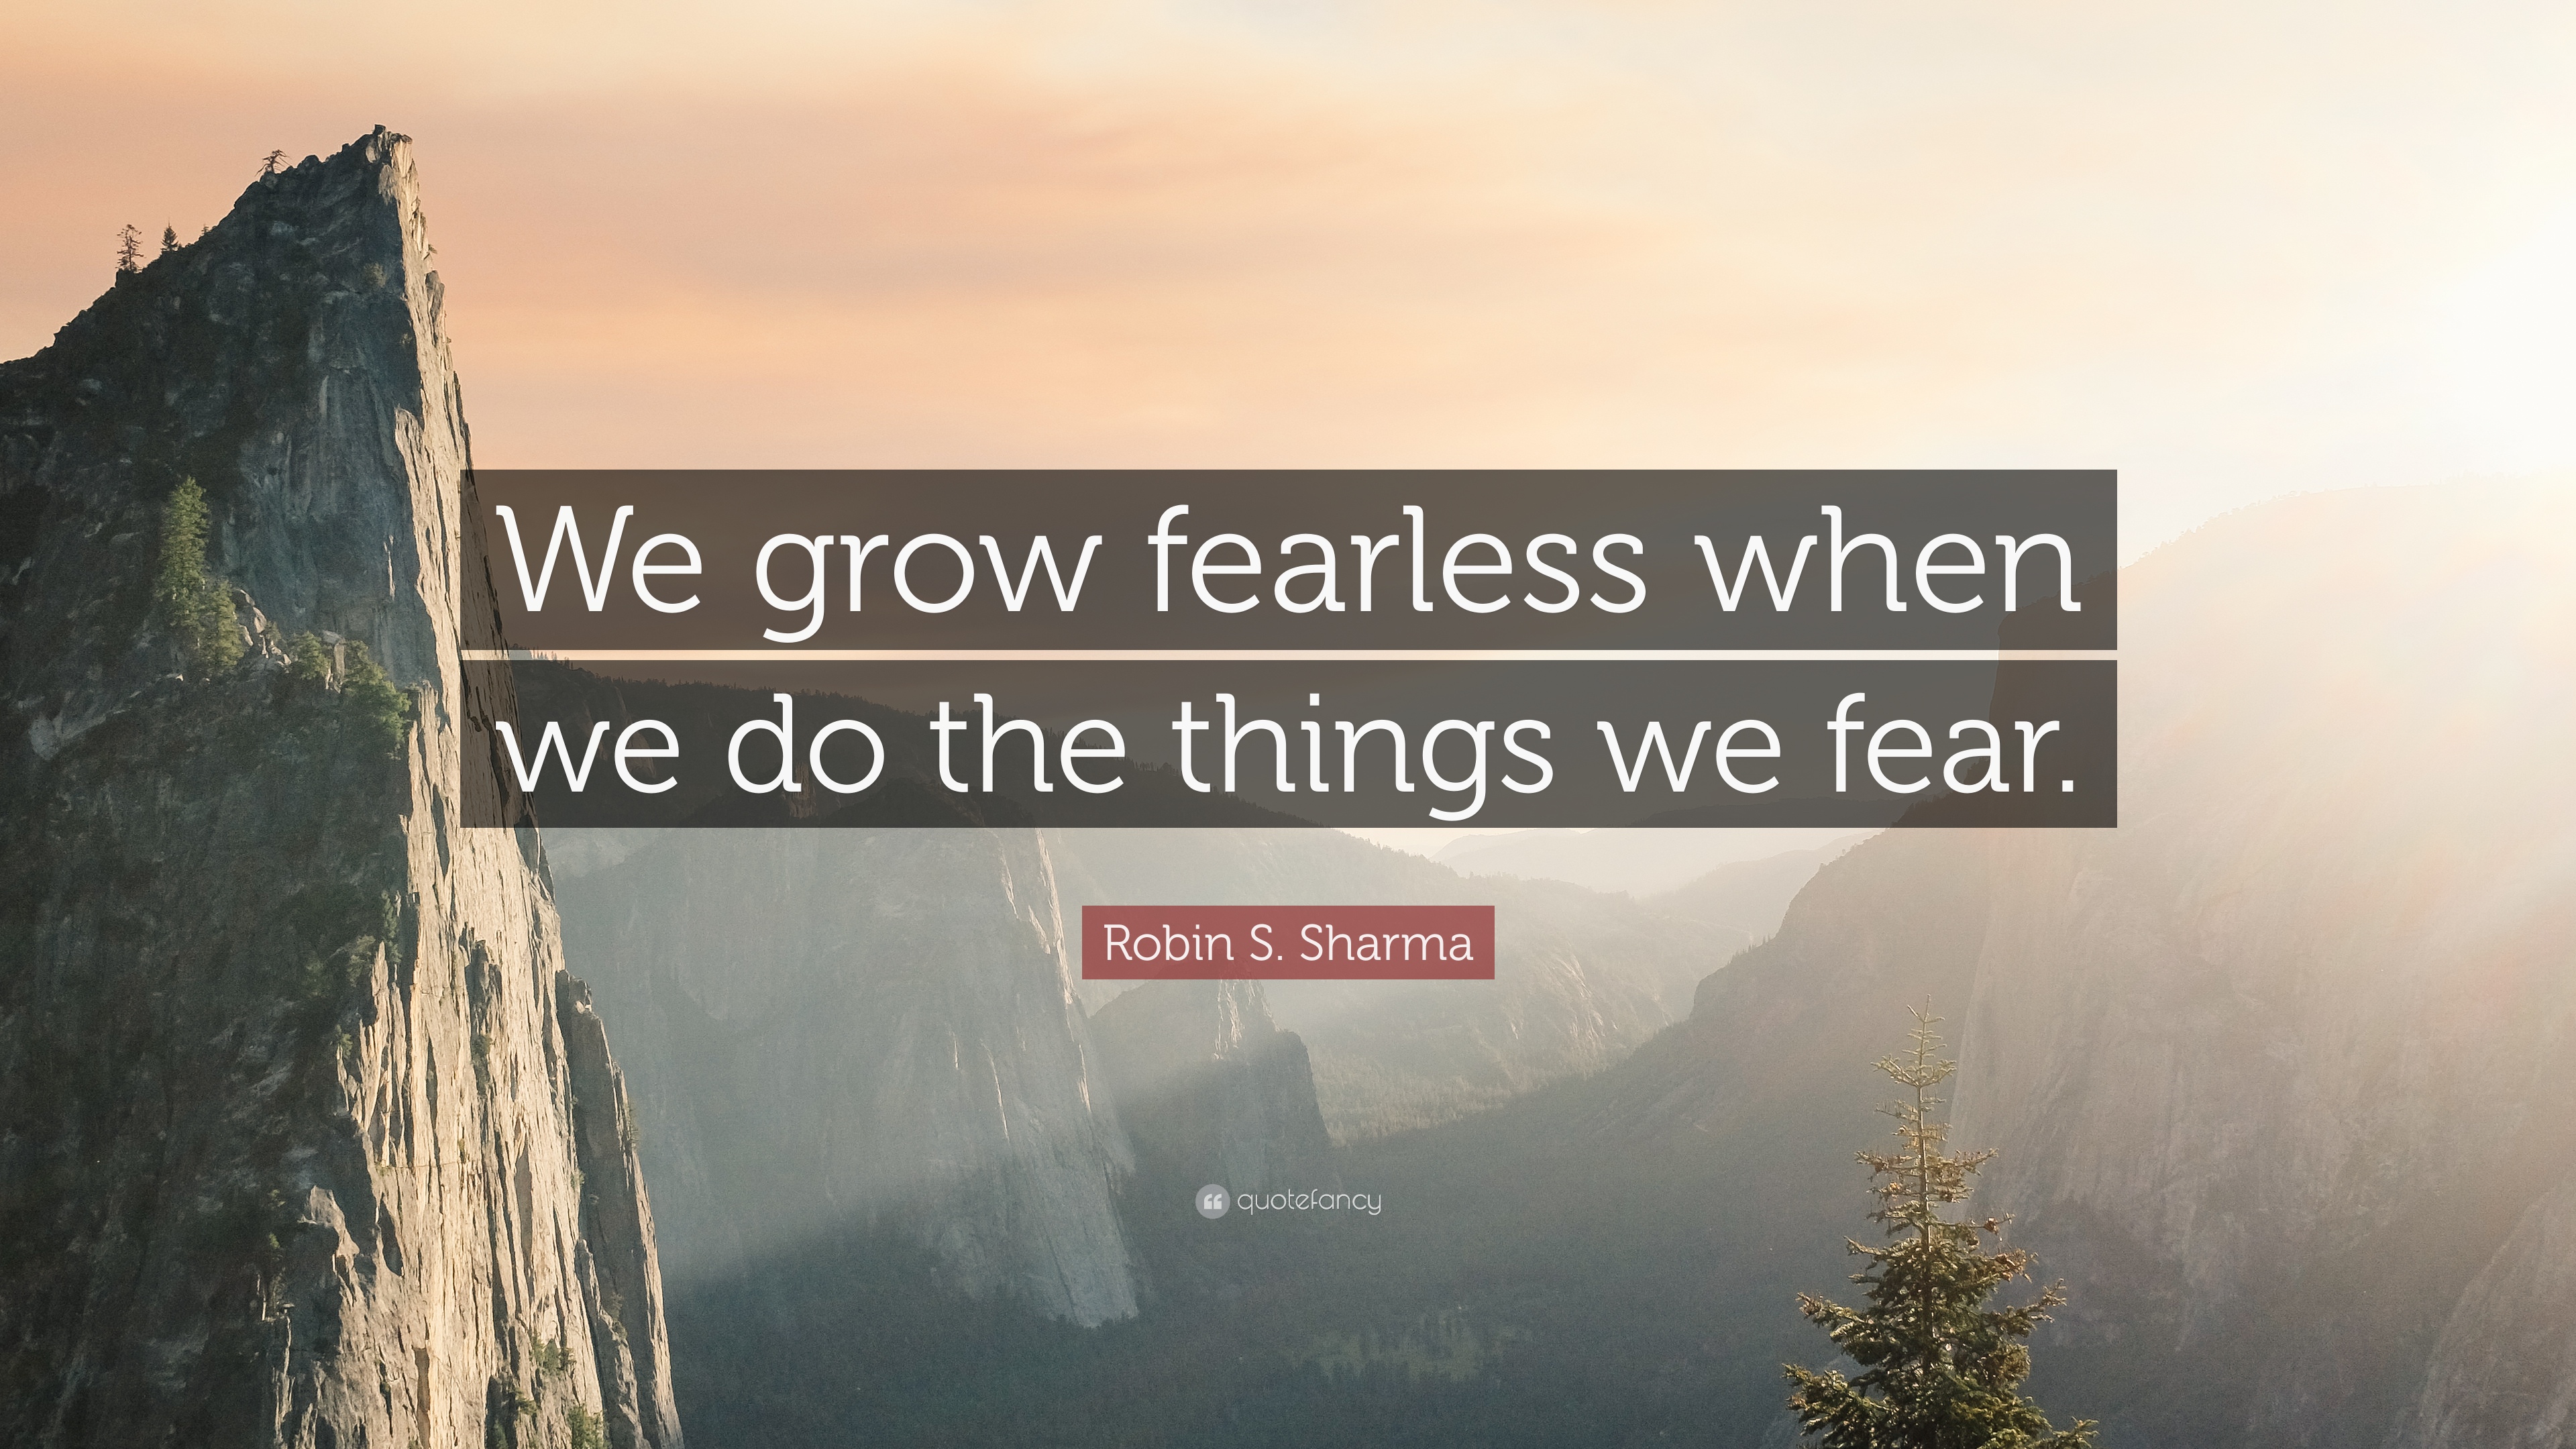 Robin S. Sharma Quote: “We grow fearless when we do the things we ...